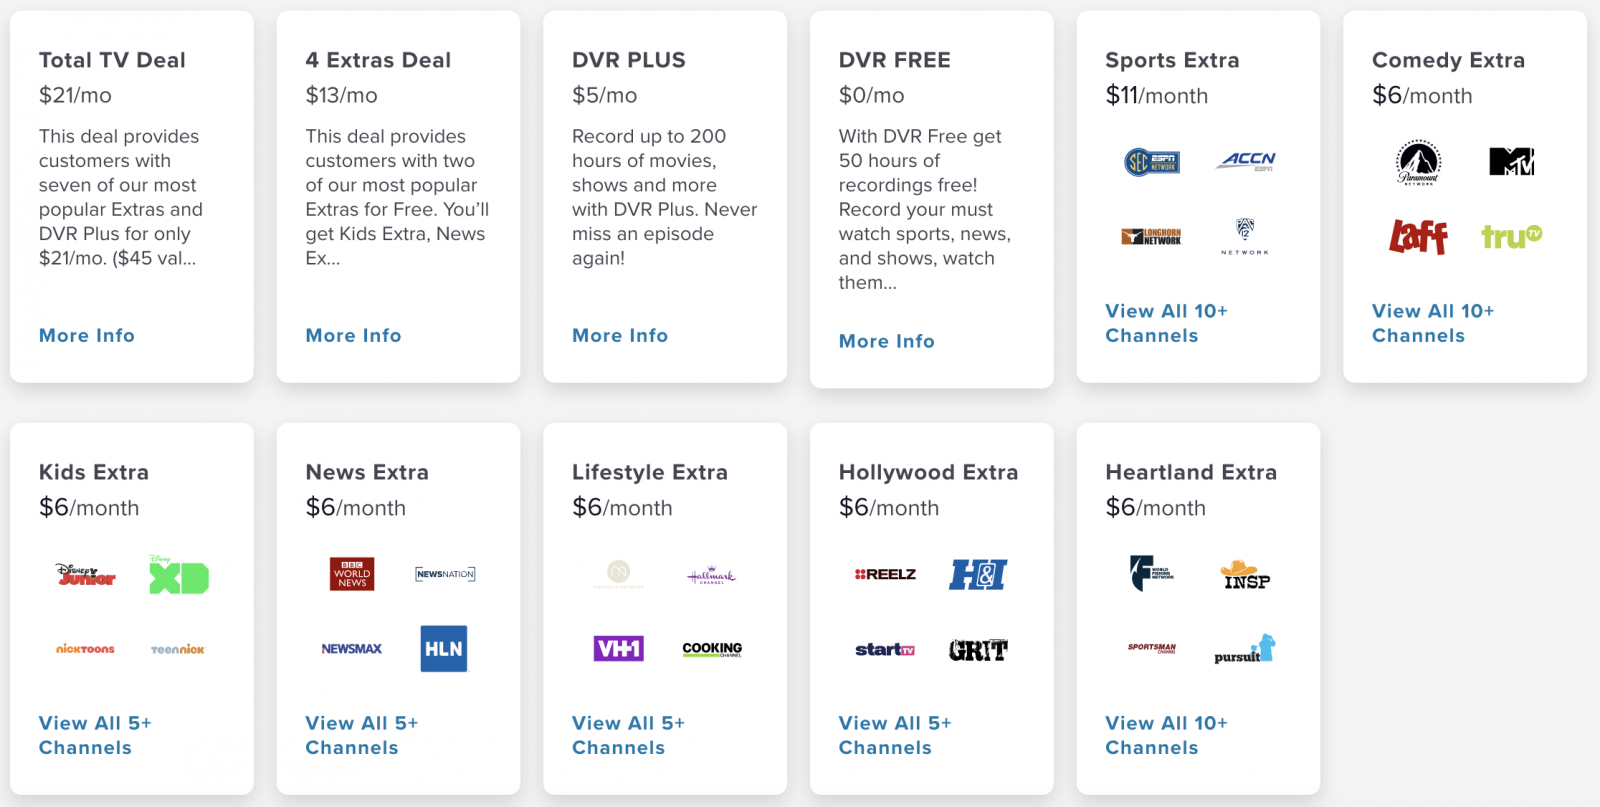 Save on Sling TV extras with our Sling TV coupons